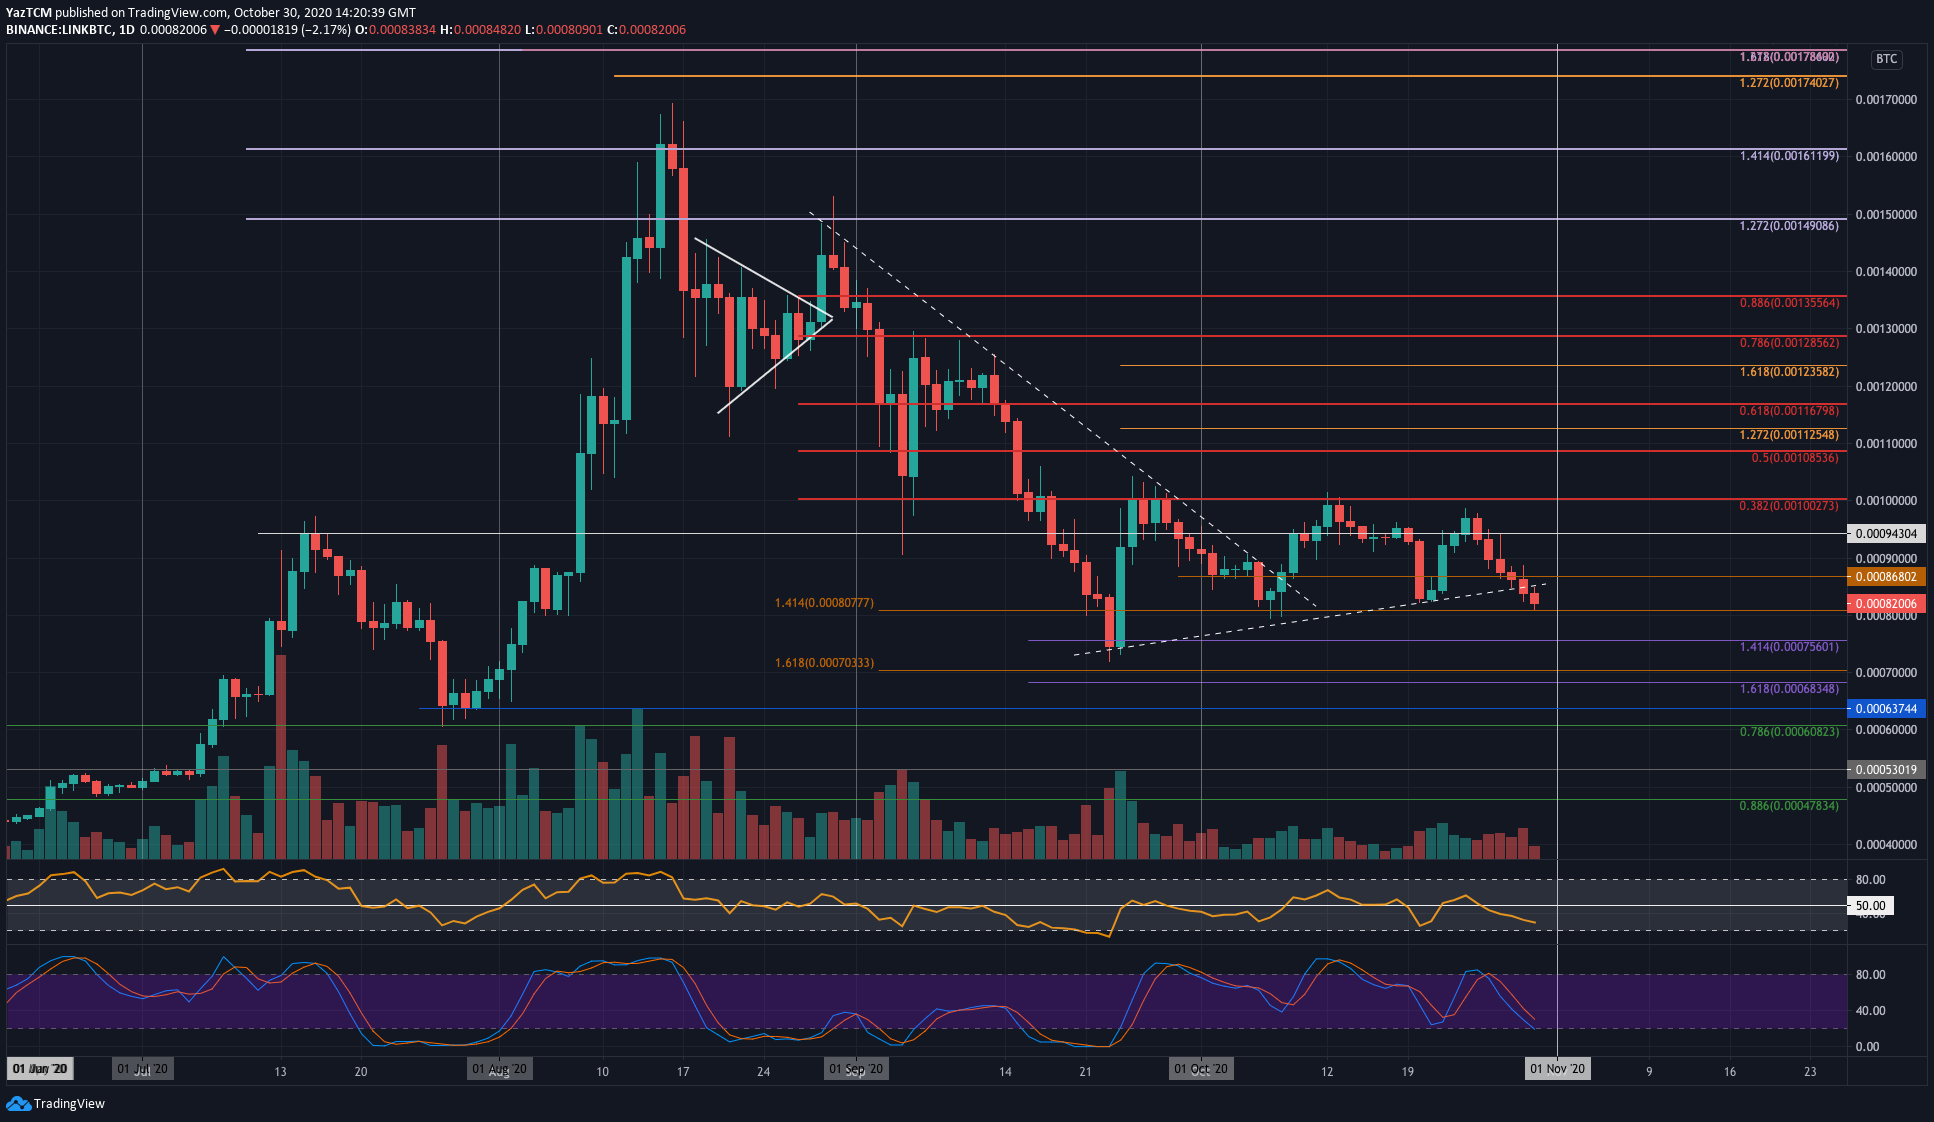 Crypto Price Analysis & Overview October 30th: Bitcoin, Ethereum, Ripple, Chainlink, and Binance Coin